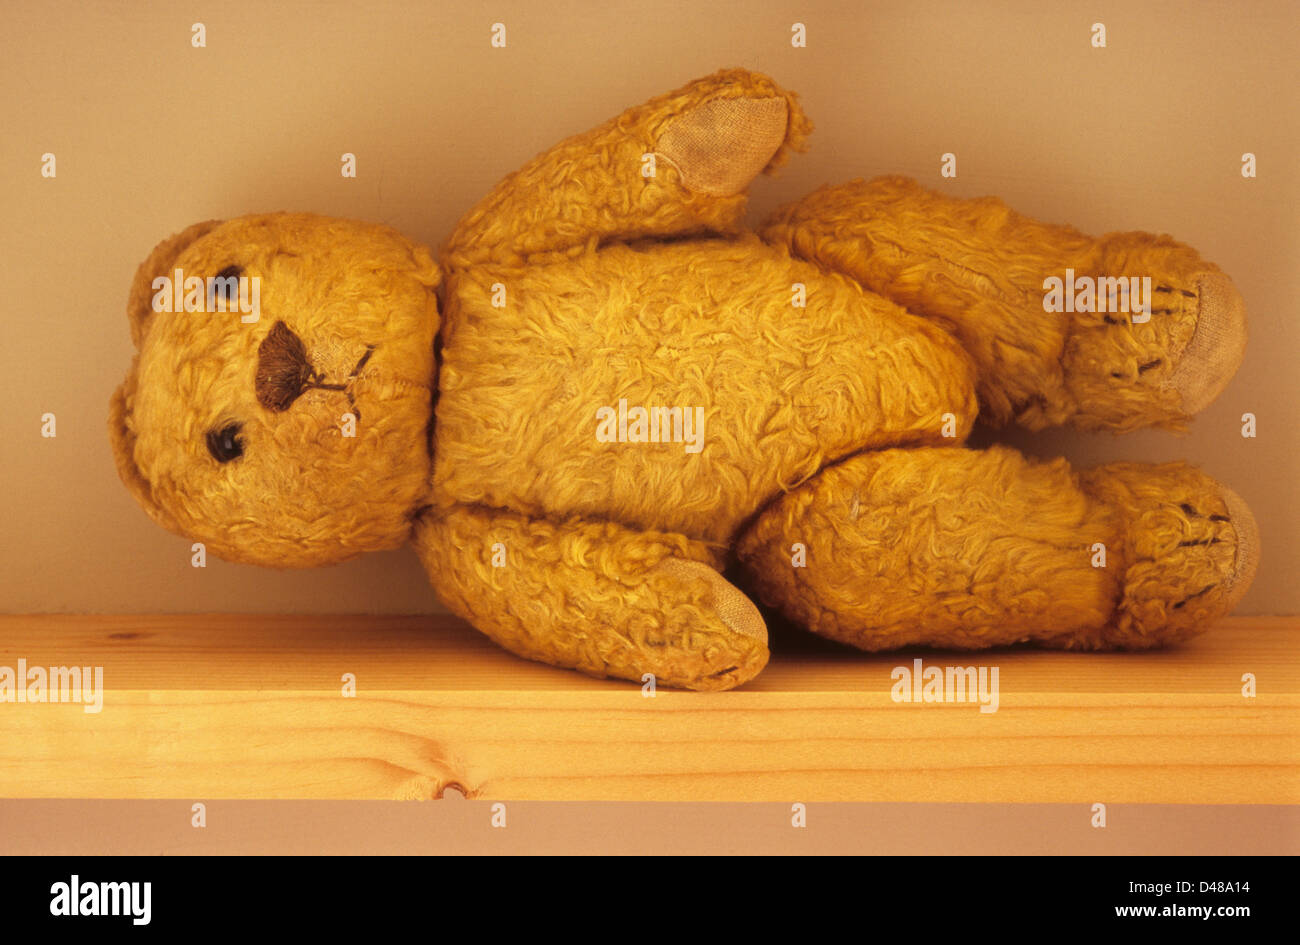 Eye-level view of vintage and well-worn golden teddy bear lying on its side on narrow wooden shelf Stock Photo